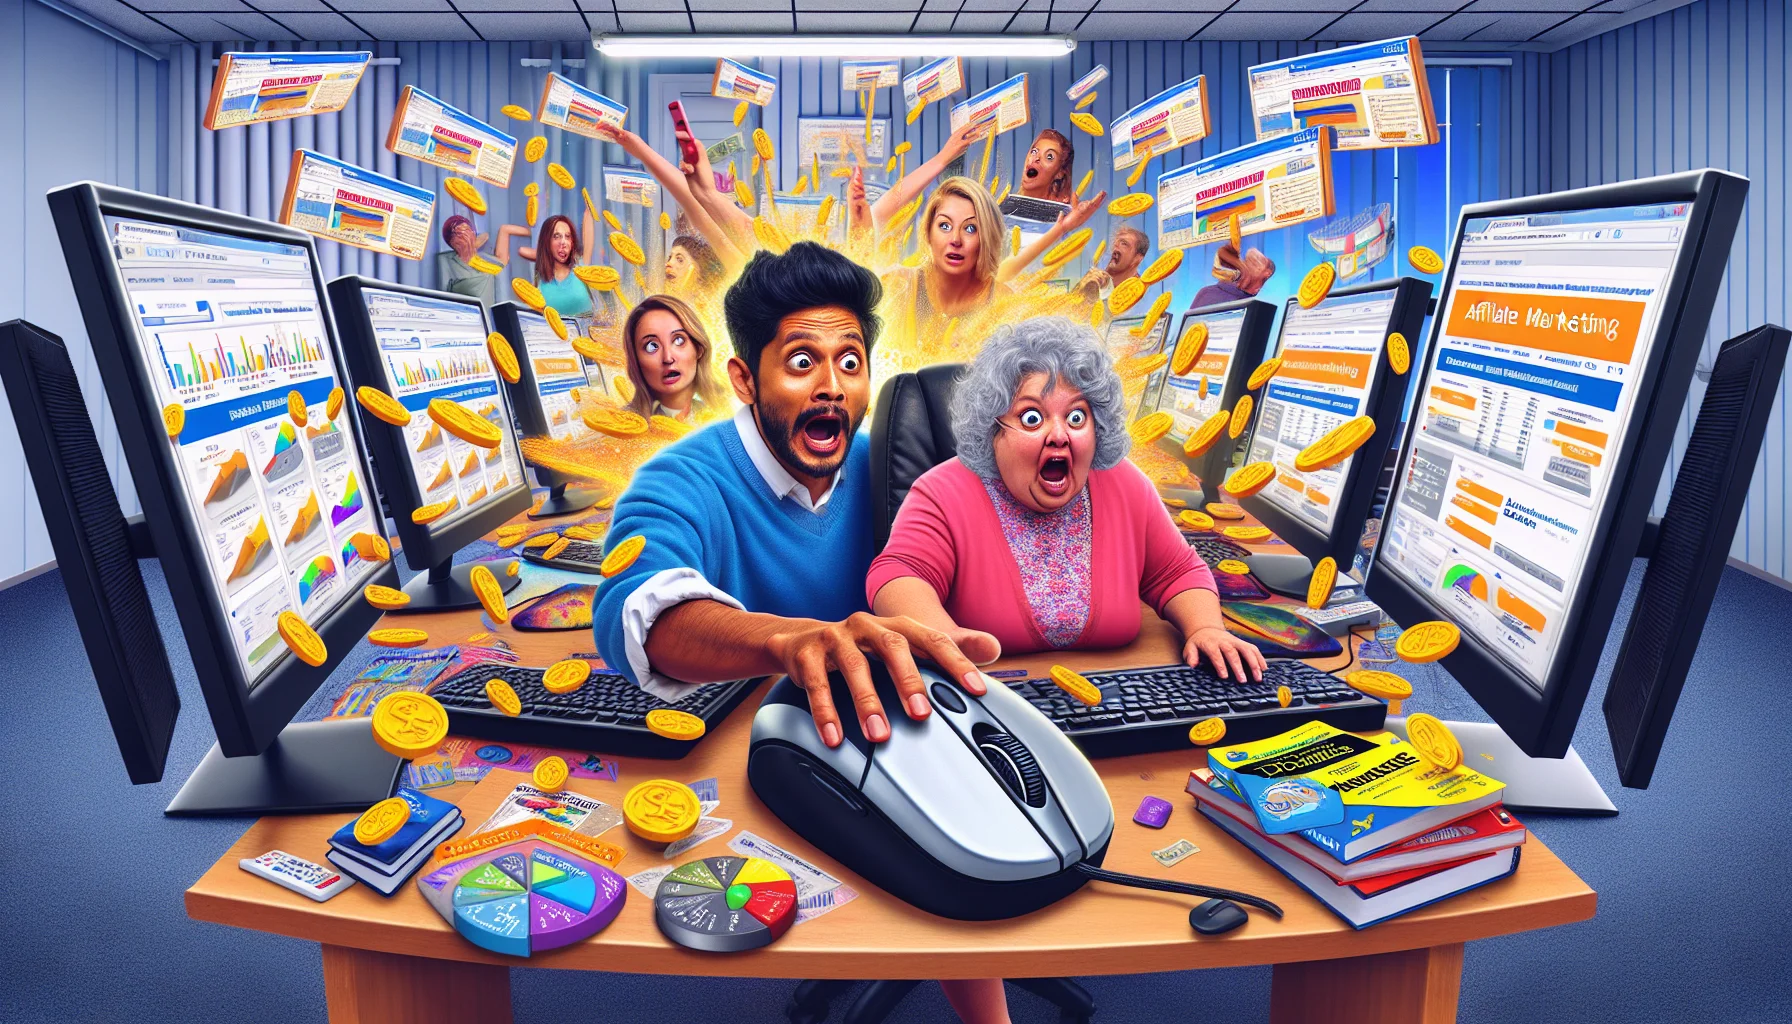 Create a humorous and exaggerated representation of affiliate marketing for beginners. Picture a scene where a middle-aged Hispanic woman and a young South Asian man are sitting at a comically large computing desk, surrounded by multiple computer screens filled with bright, confusing charts and graphs. They're enthusiastically clicking on a giant, oversized mouse, with expressions of utter confusion mixed with excitement. Every click results in a dramatic flurry of virtual coins pouring out of screens. The scene is set in a typical office environment decorated with beginner guides and 'Affiliate Marketing for Dummies' books.